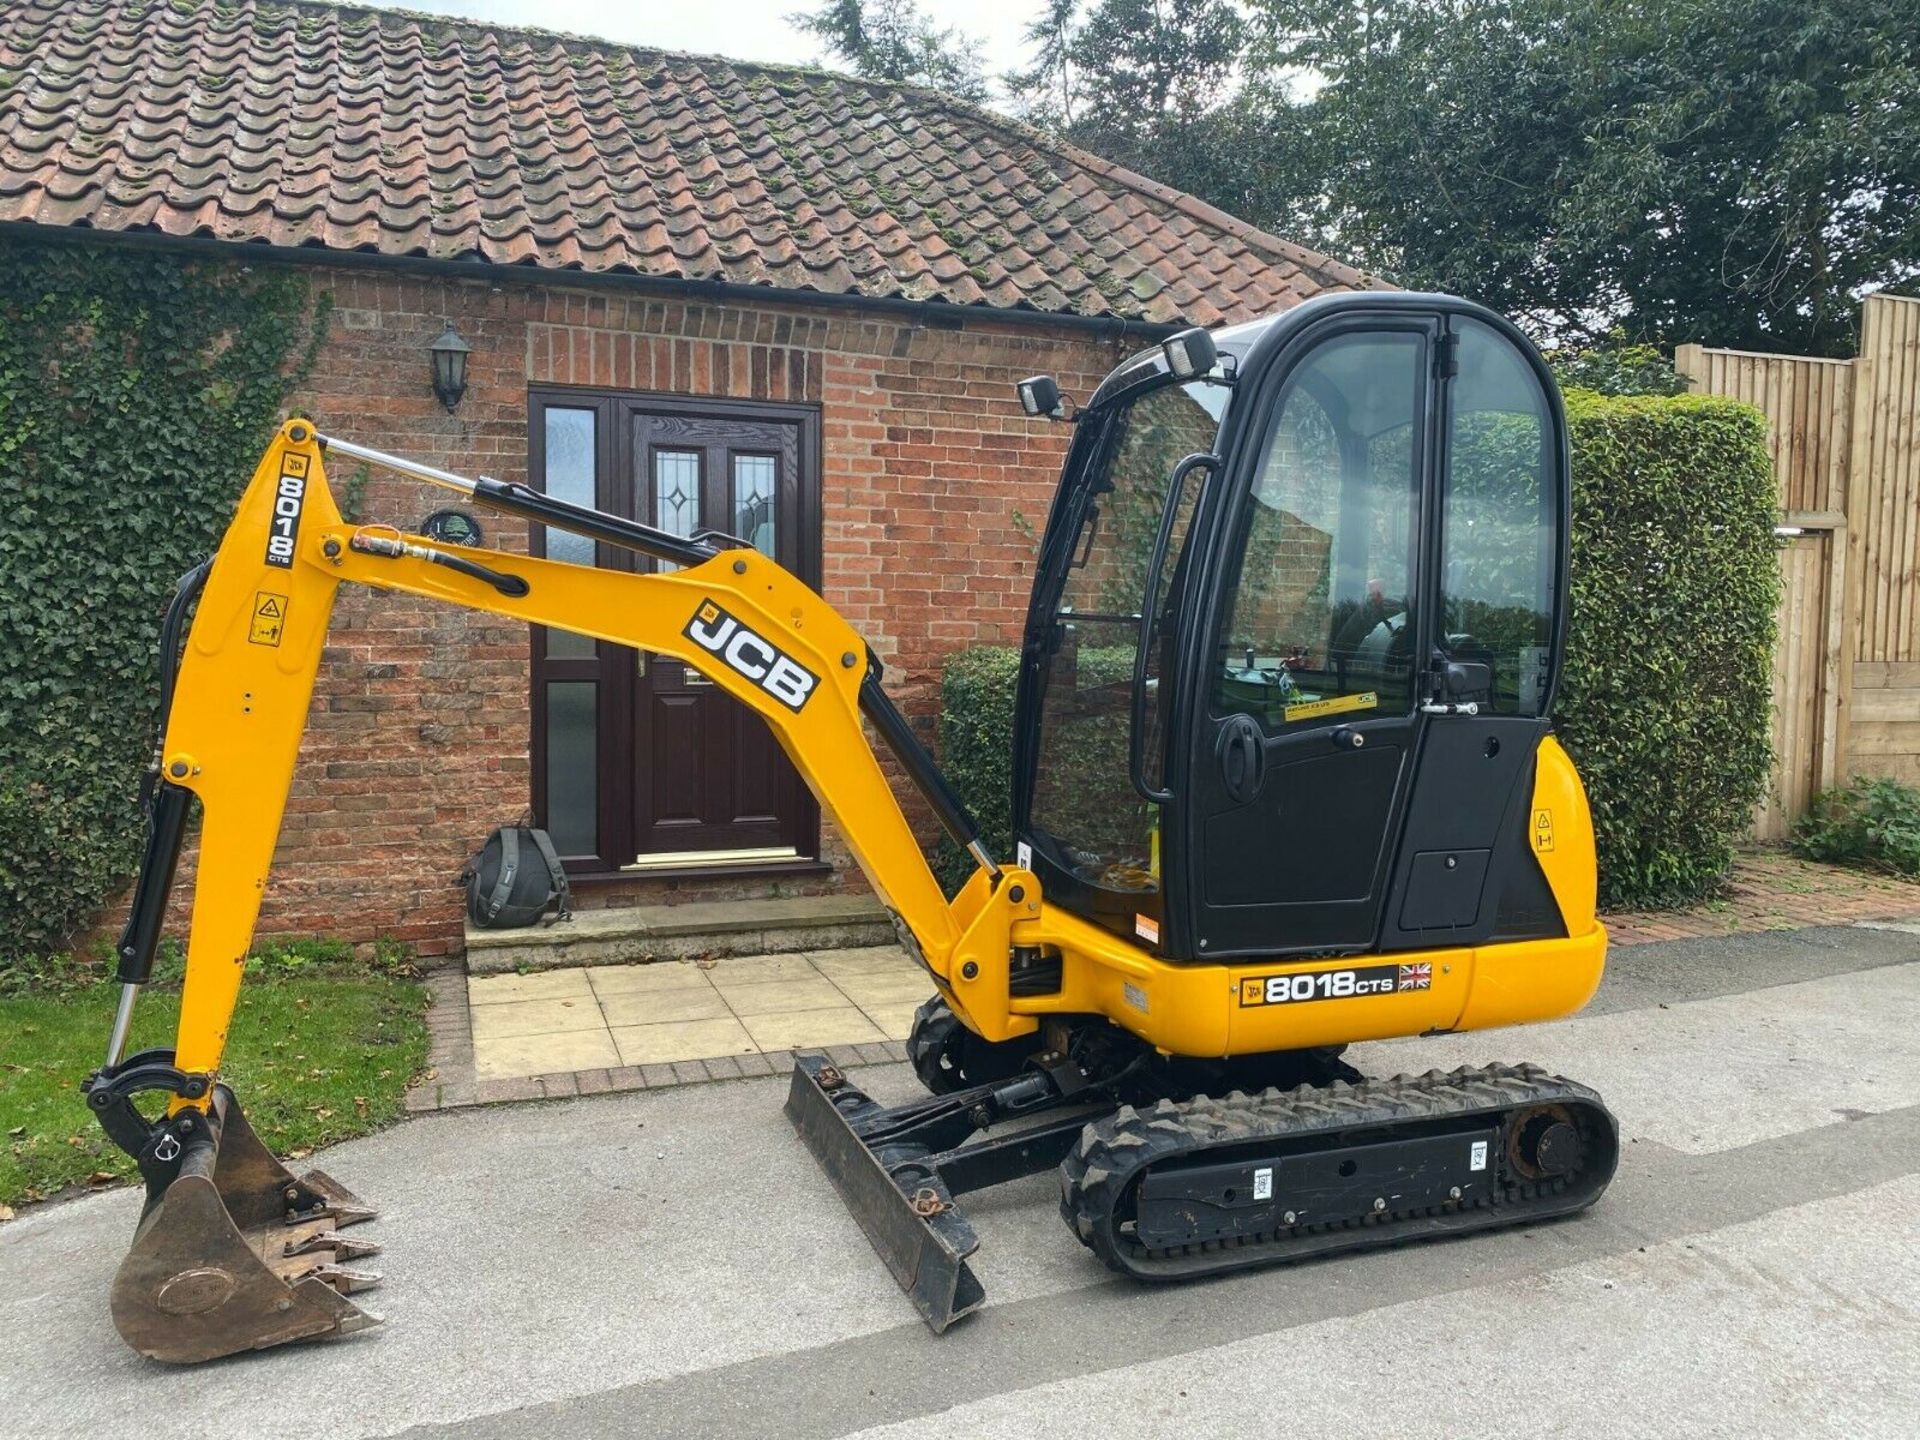 JCB MINI EXCAVATOR 8018 CTS, ONLY 236 HOURS FROM NEW, FULL CAB, 1 OWNER GENUINE *PLUS VAT* - Image 10 of 10